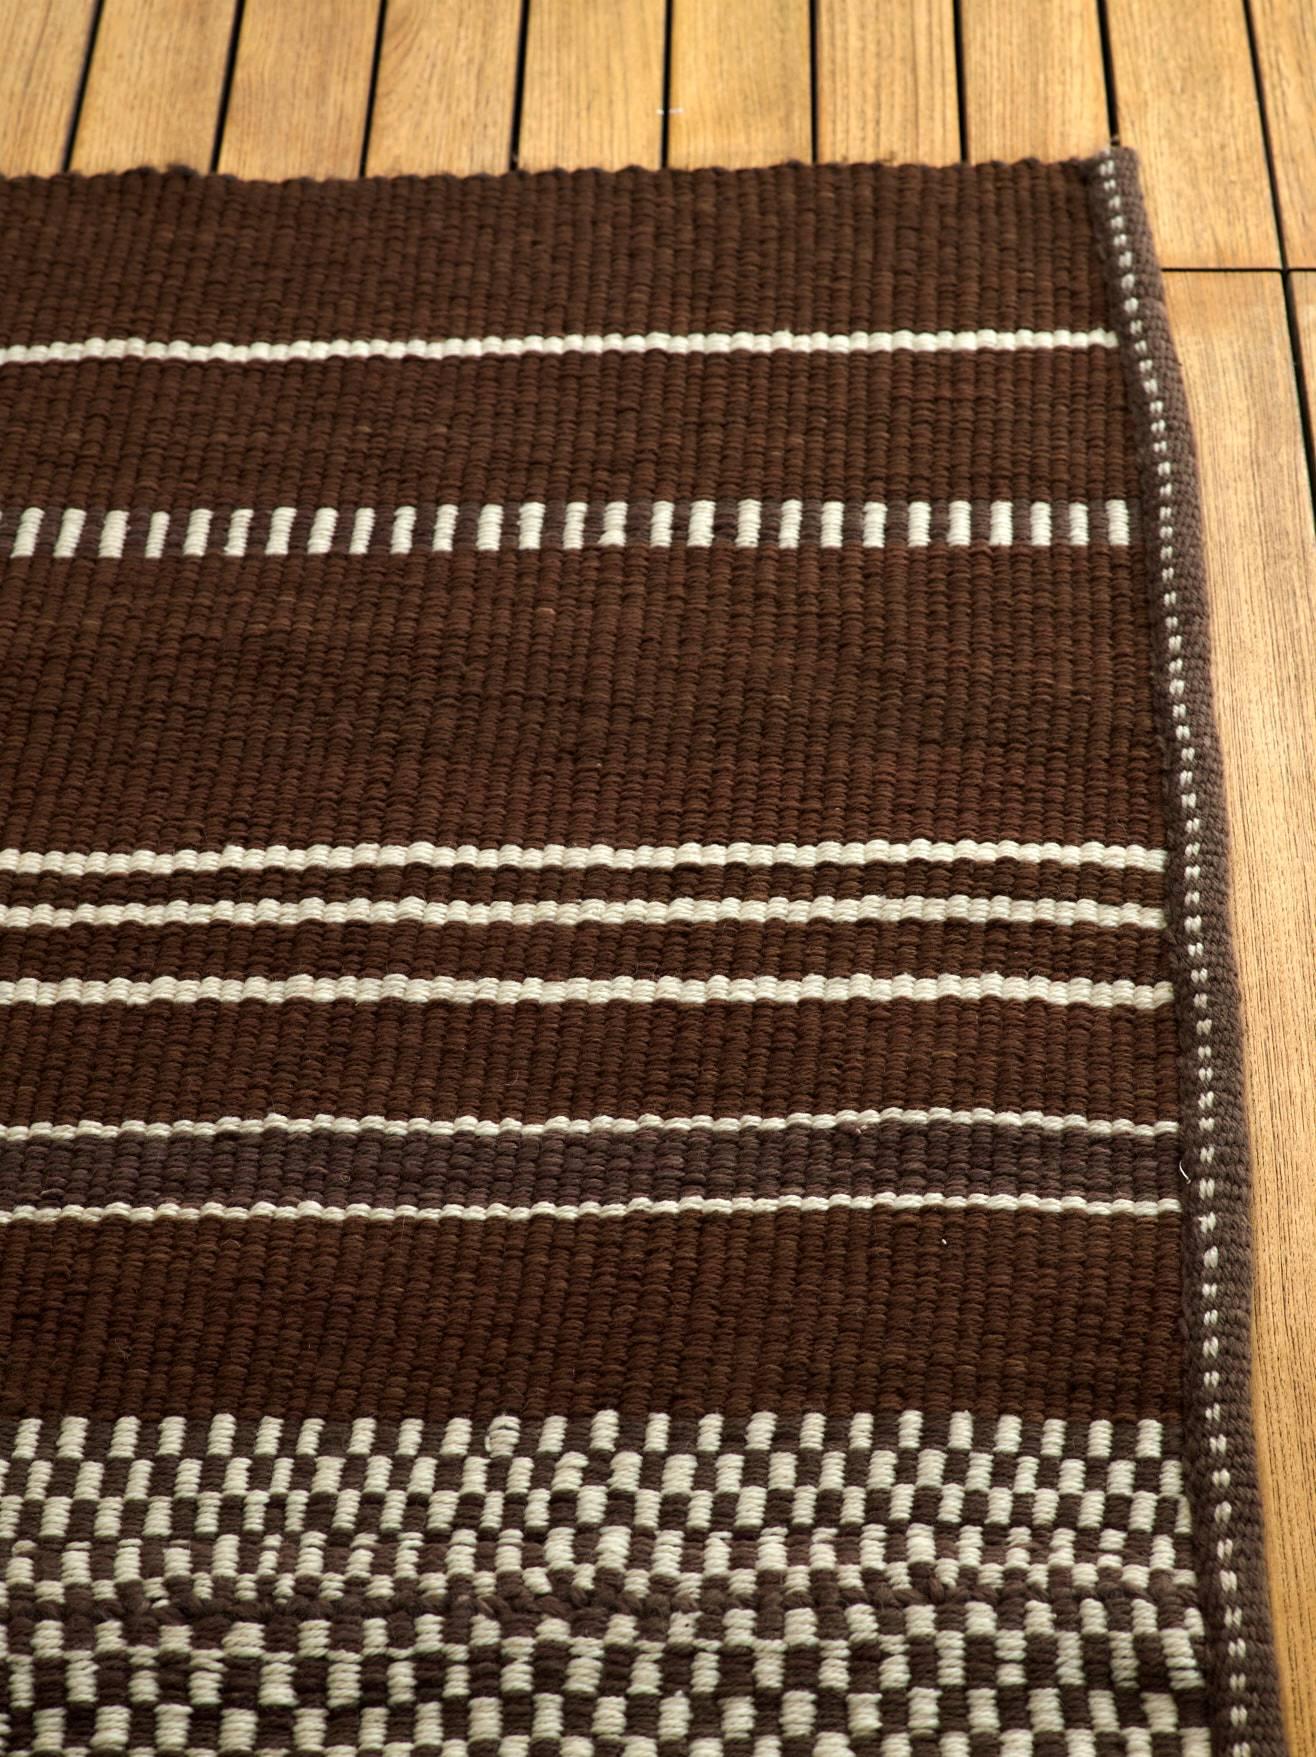 This outstanding rug is handmade in Argentina, woven on traditional manual loom with 100% pure fine hand spun sheep wool from the Andes. Ecru wool have the natural color without dyeing, brown wool is dyed with Algarrobo’s bark: South American carob